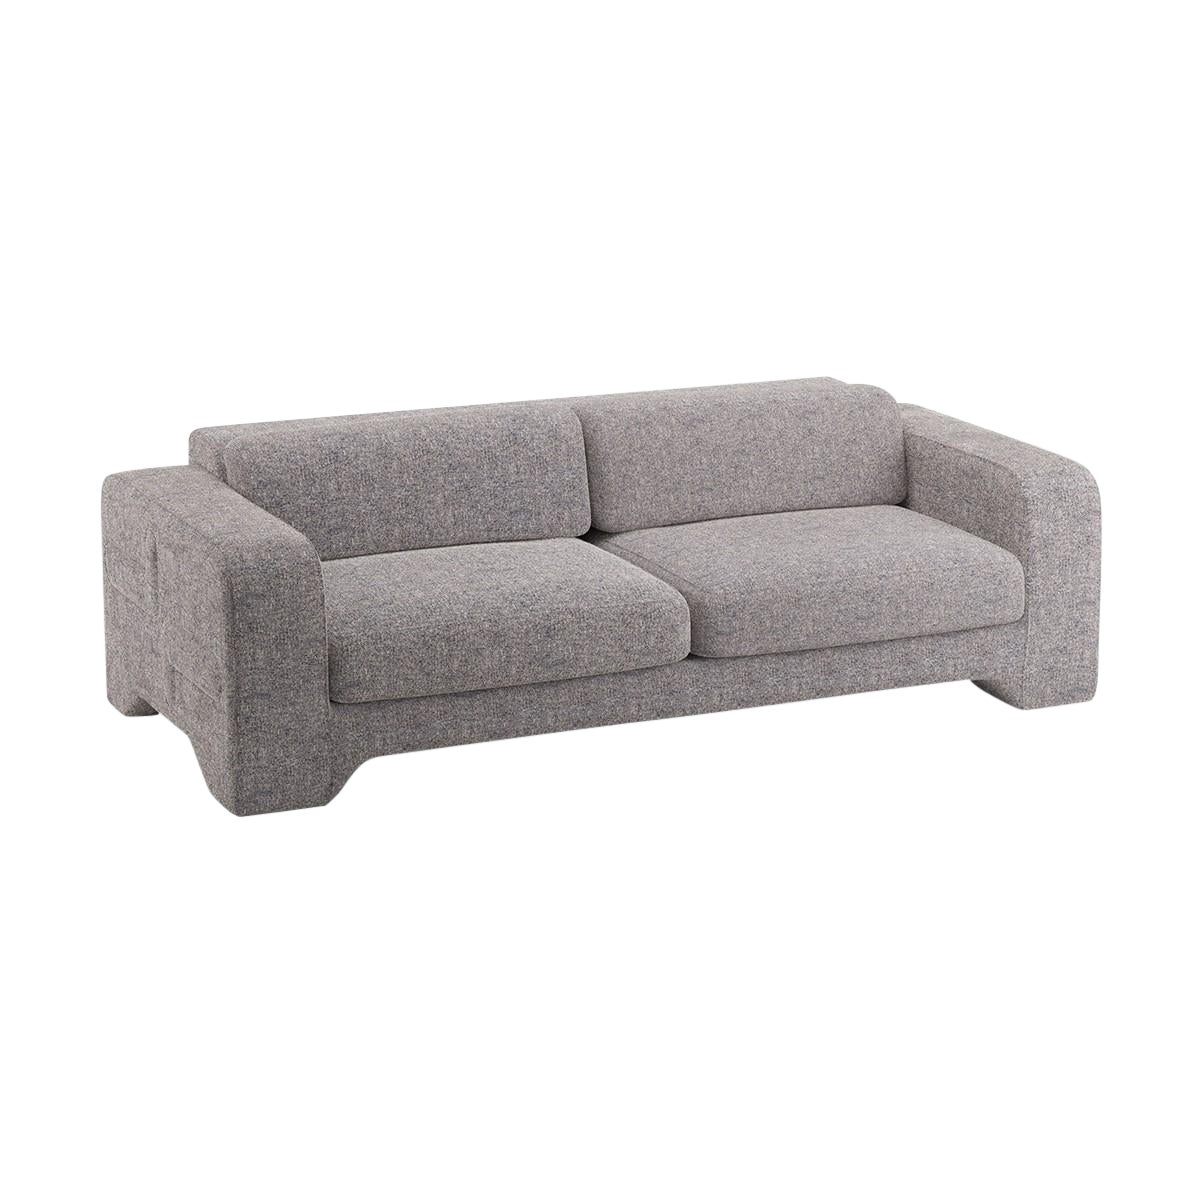 Popus Editions Giovanna 2.5 Seater Sofa in Marine London Linen Fabric For Sale